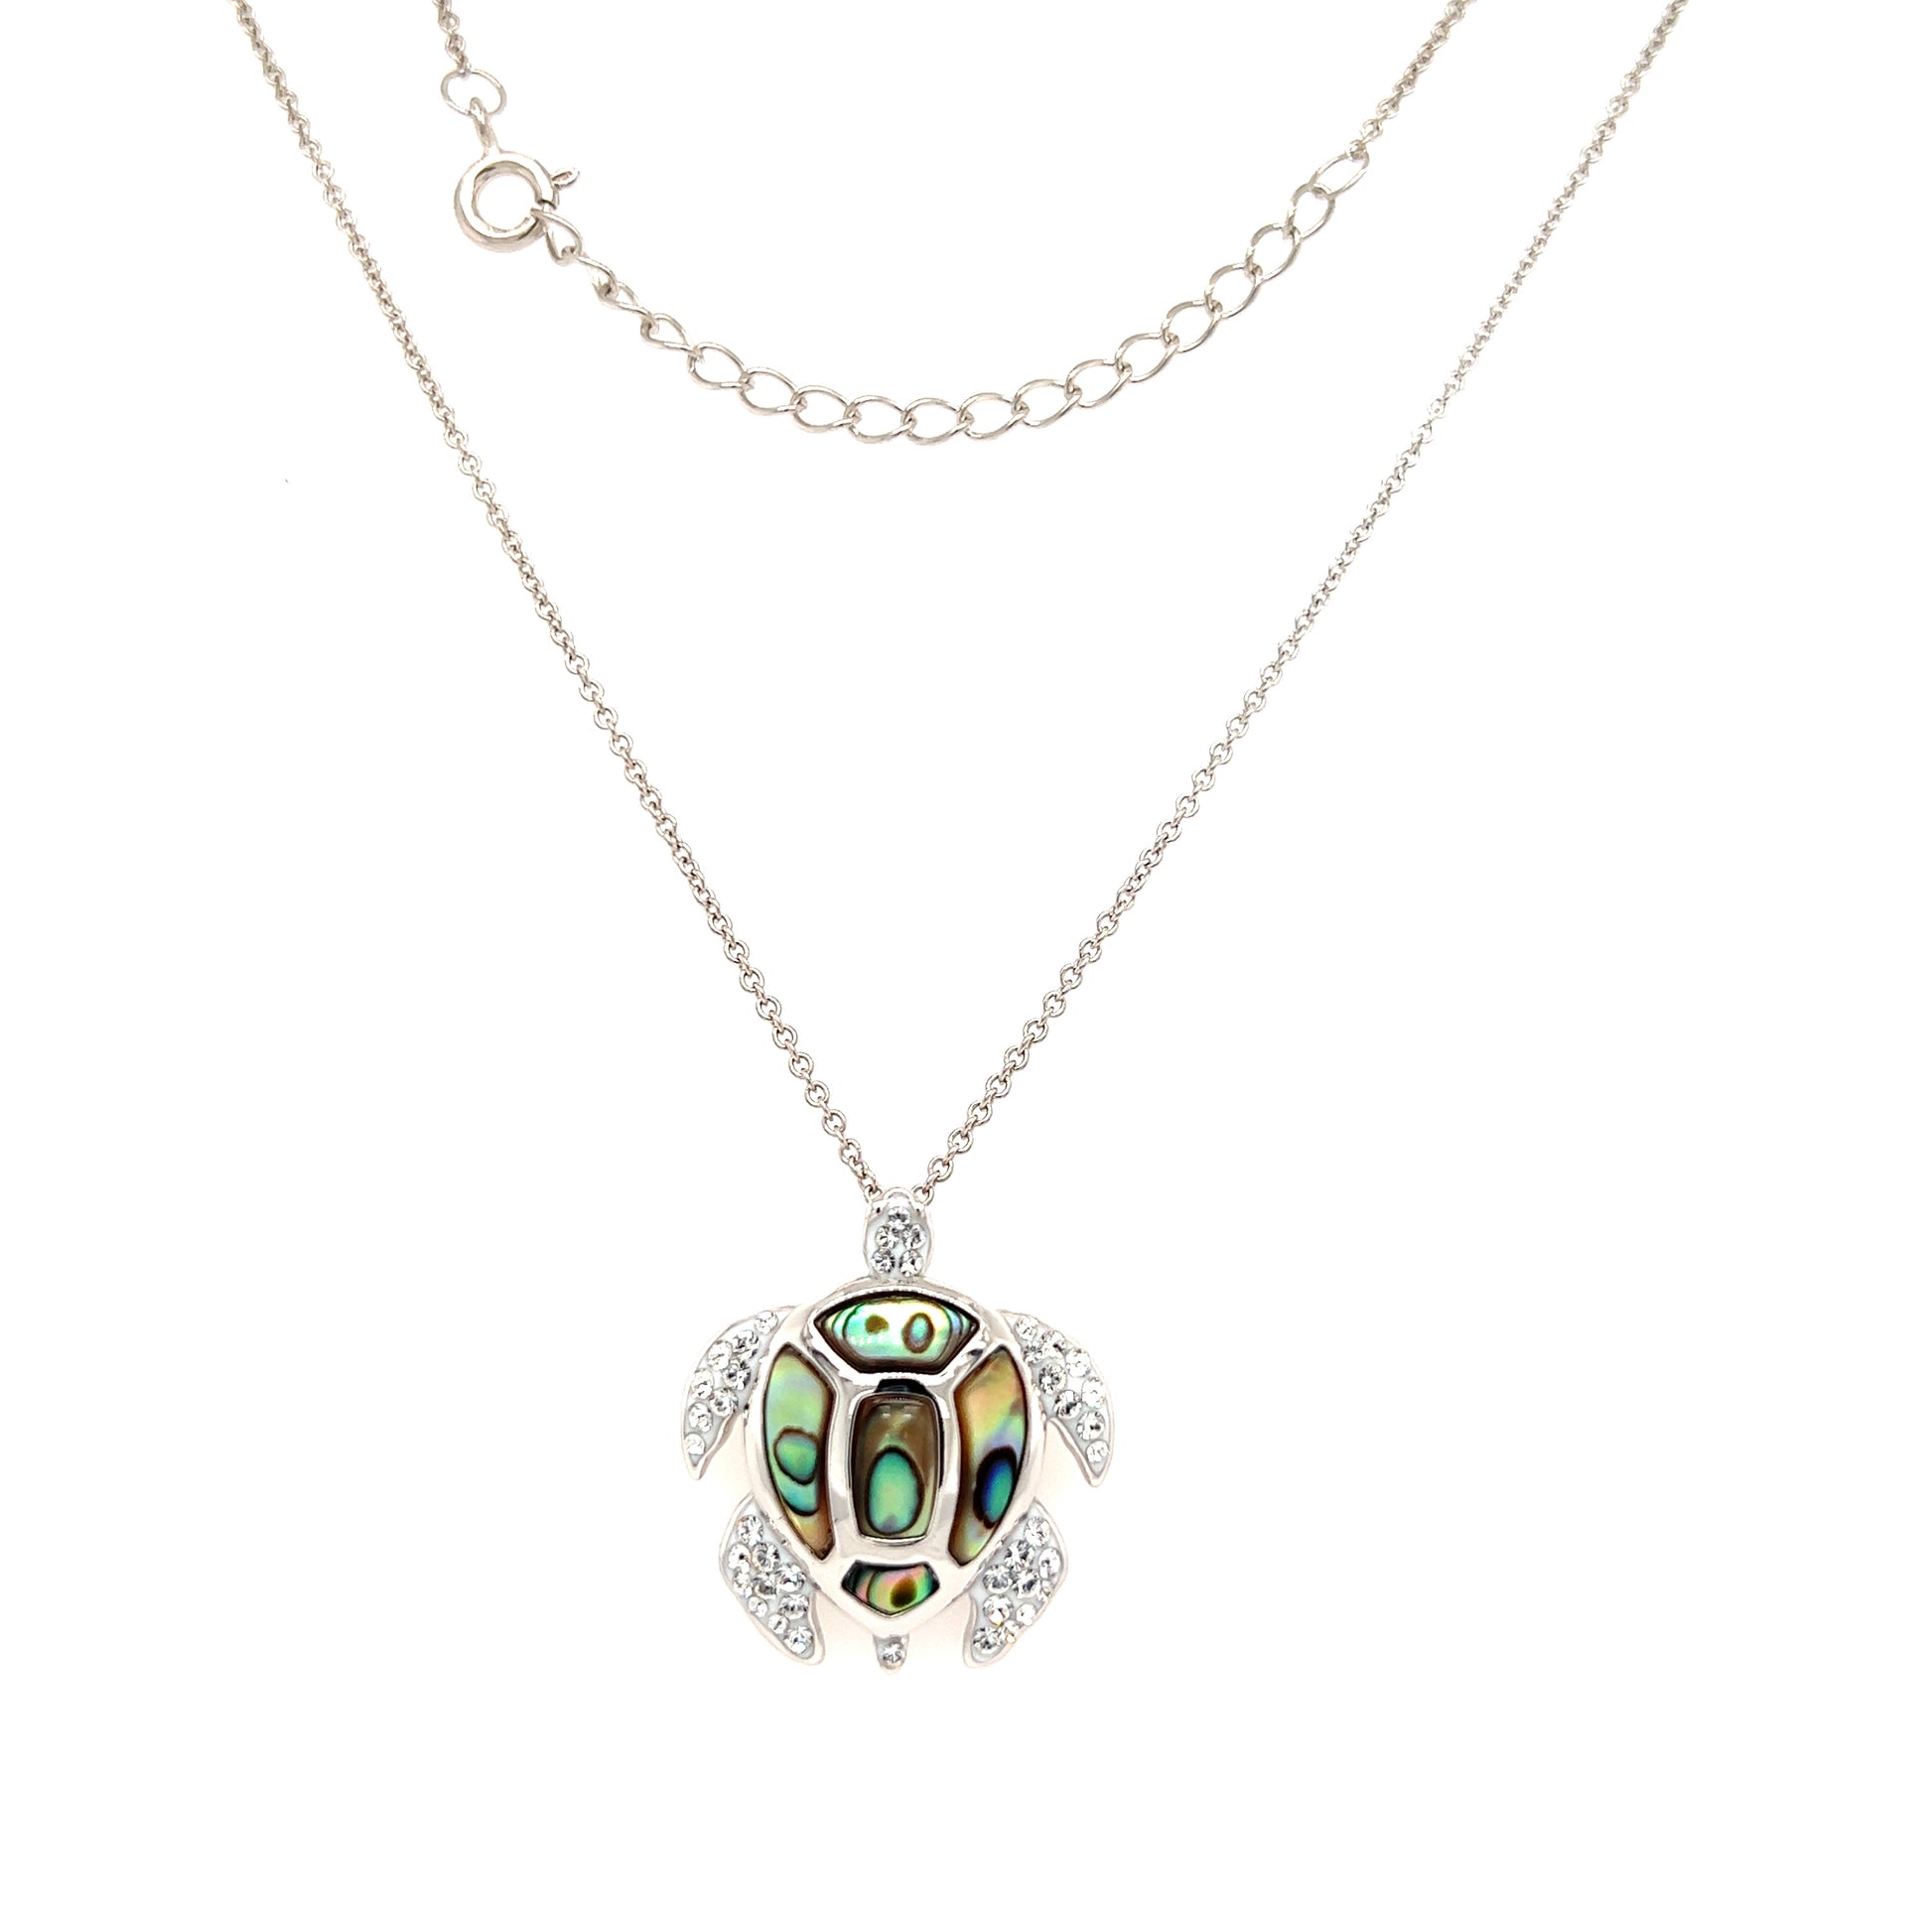 Sea Turtle Necklace with Abalone Shell Accents and White Crystals in Sterling Silver Full Necklace View